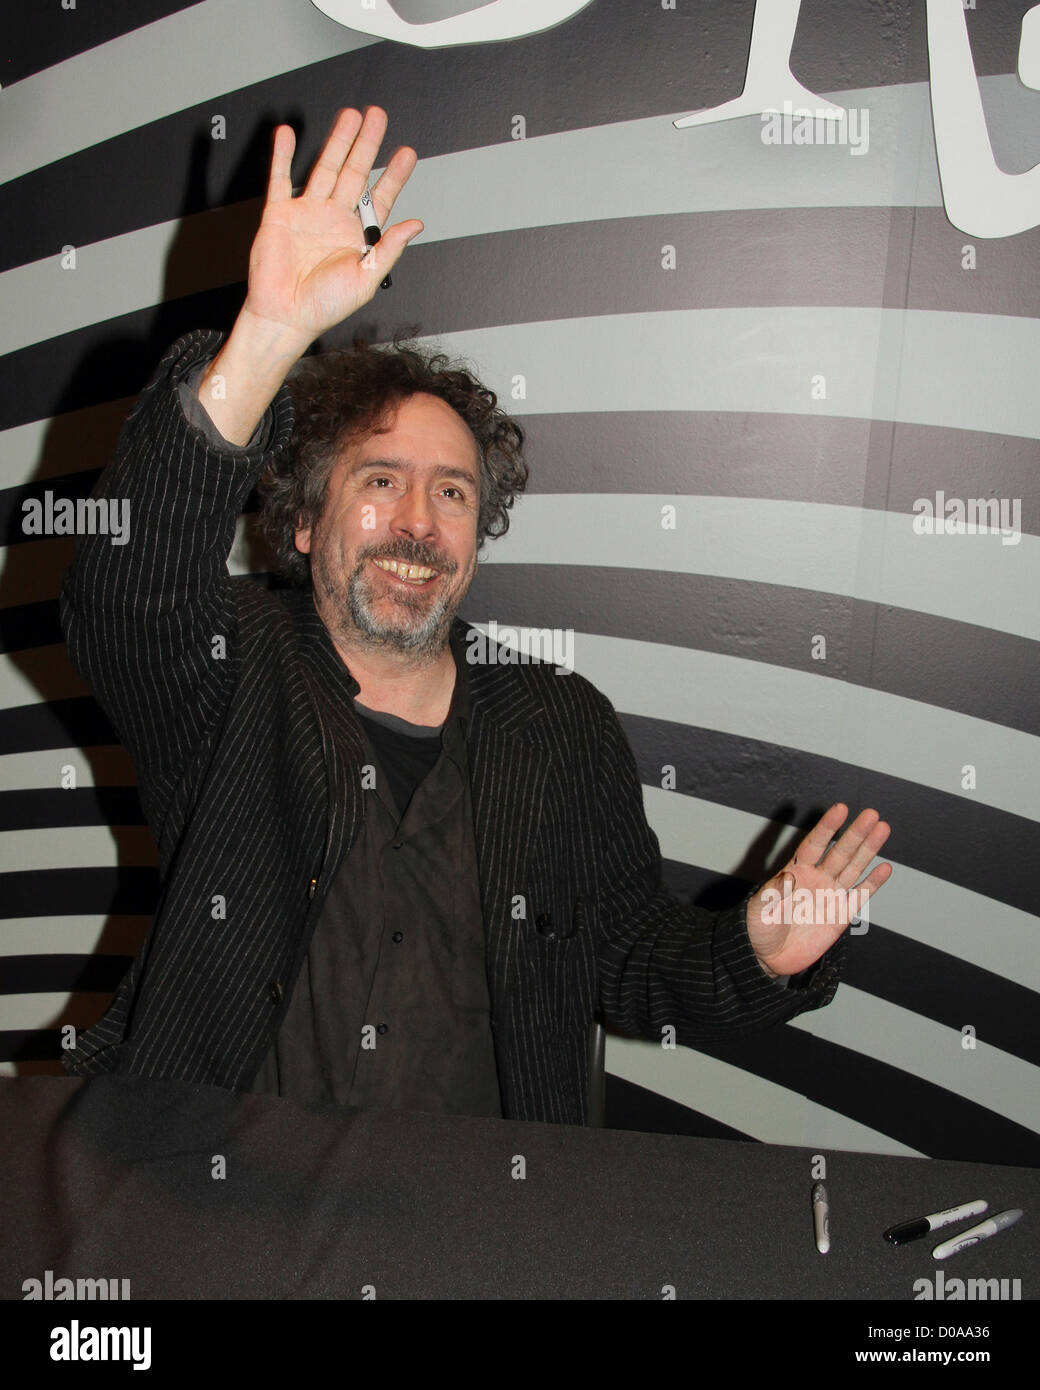 Tim Burton appearance at Bell Tiff Lightbox the media event of 'Tim Burton Exhibition' organized by The Museum of Modern Stock Photo